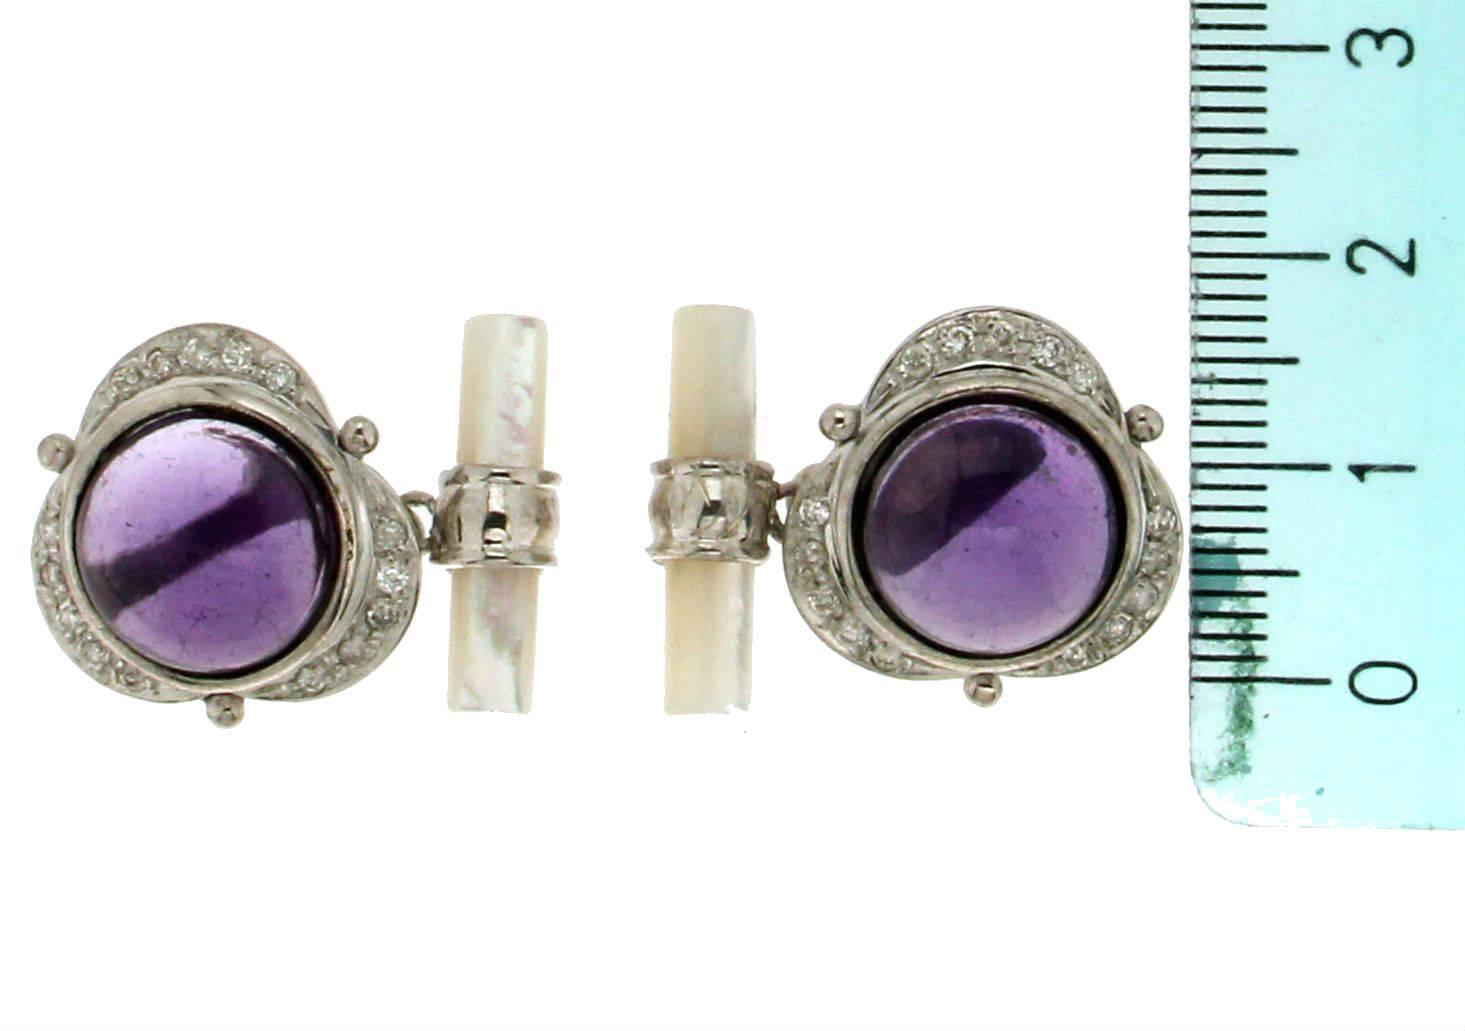 Very chic versatile combination of cufflinks in white gold mounted with diamonds, round amethysts while the bar are in mother of pearl.